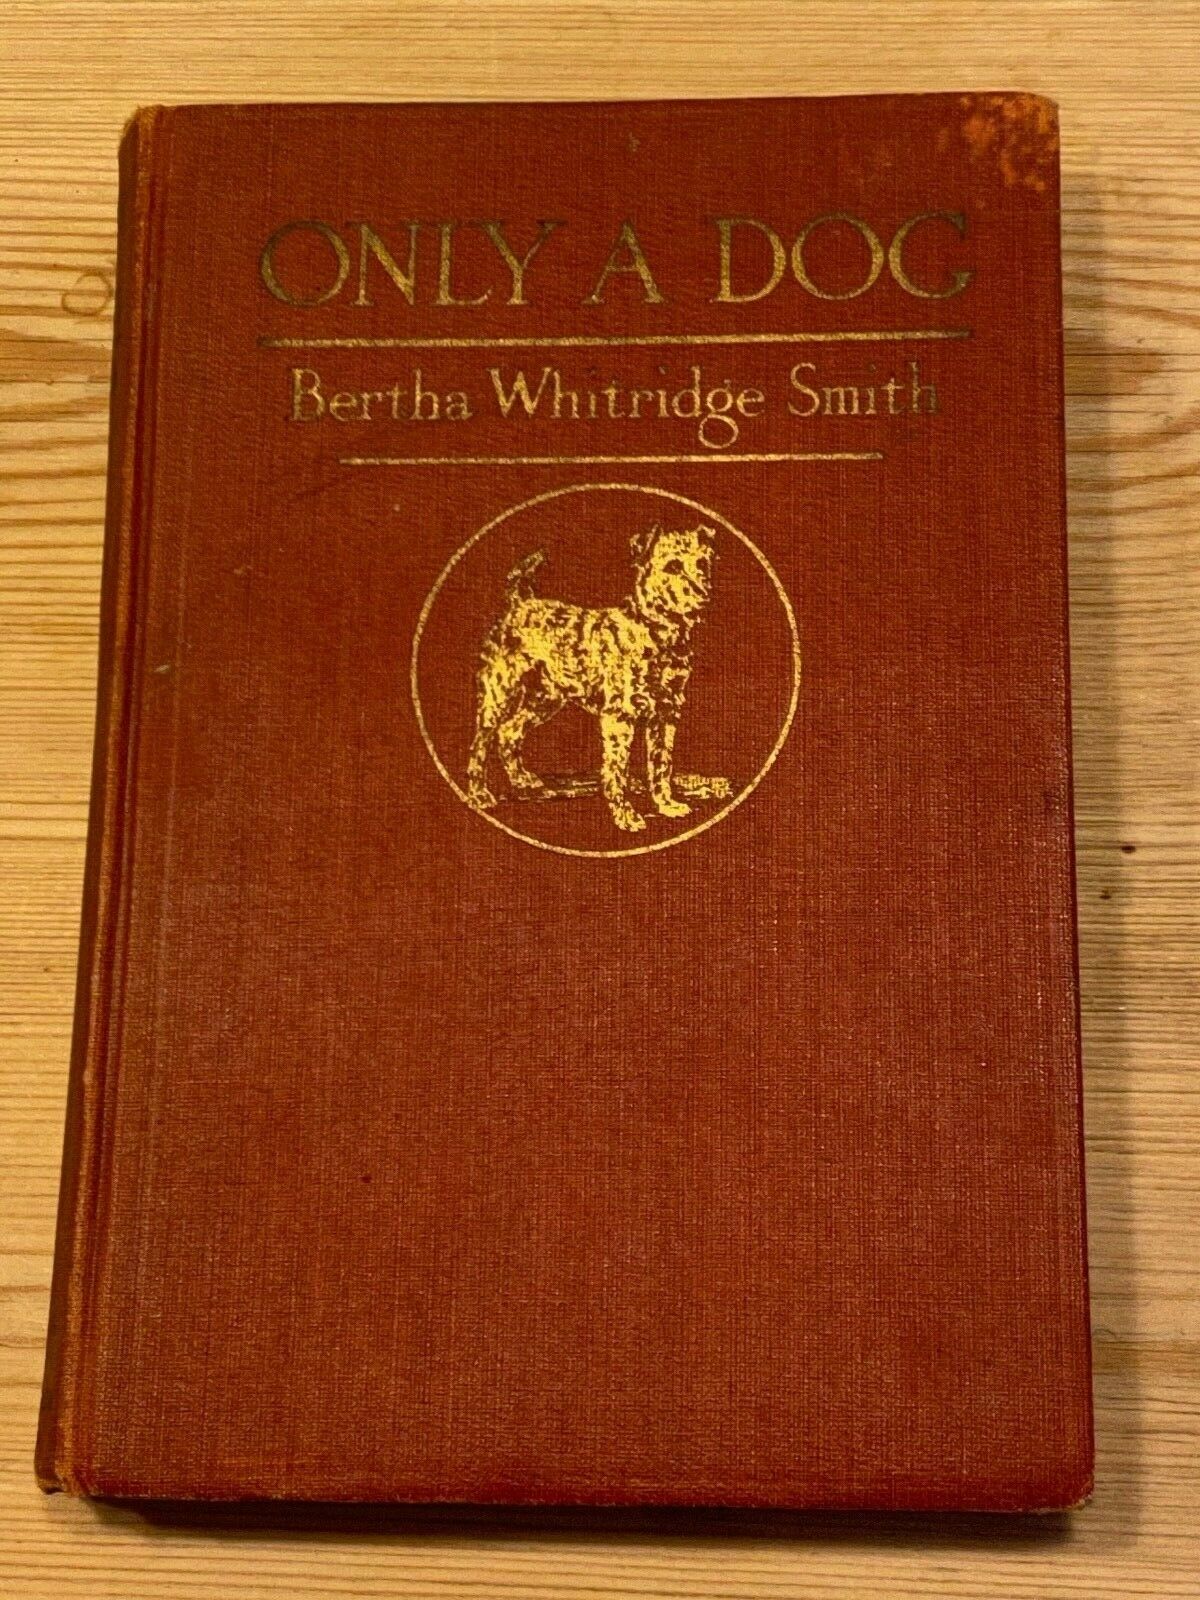 Very Rare Irish Terrier Dog Story Book 1st 1917 "only A Dog" By Bertha Smith